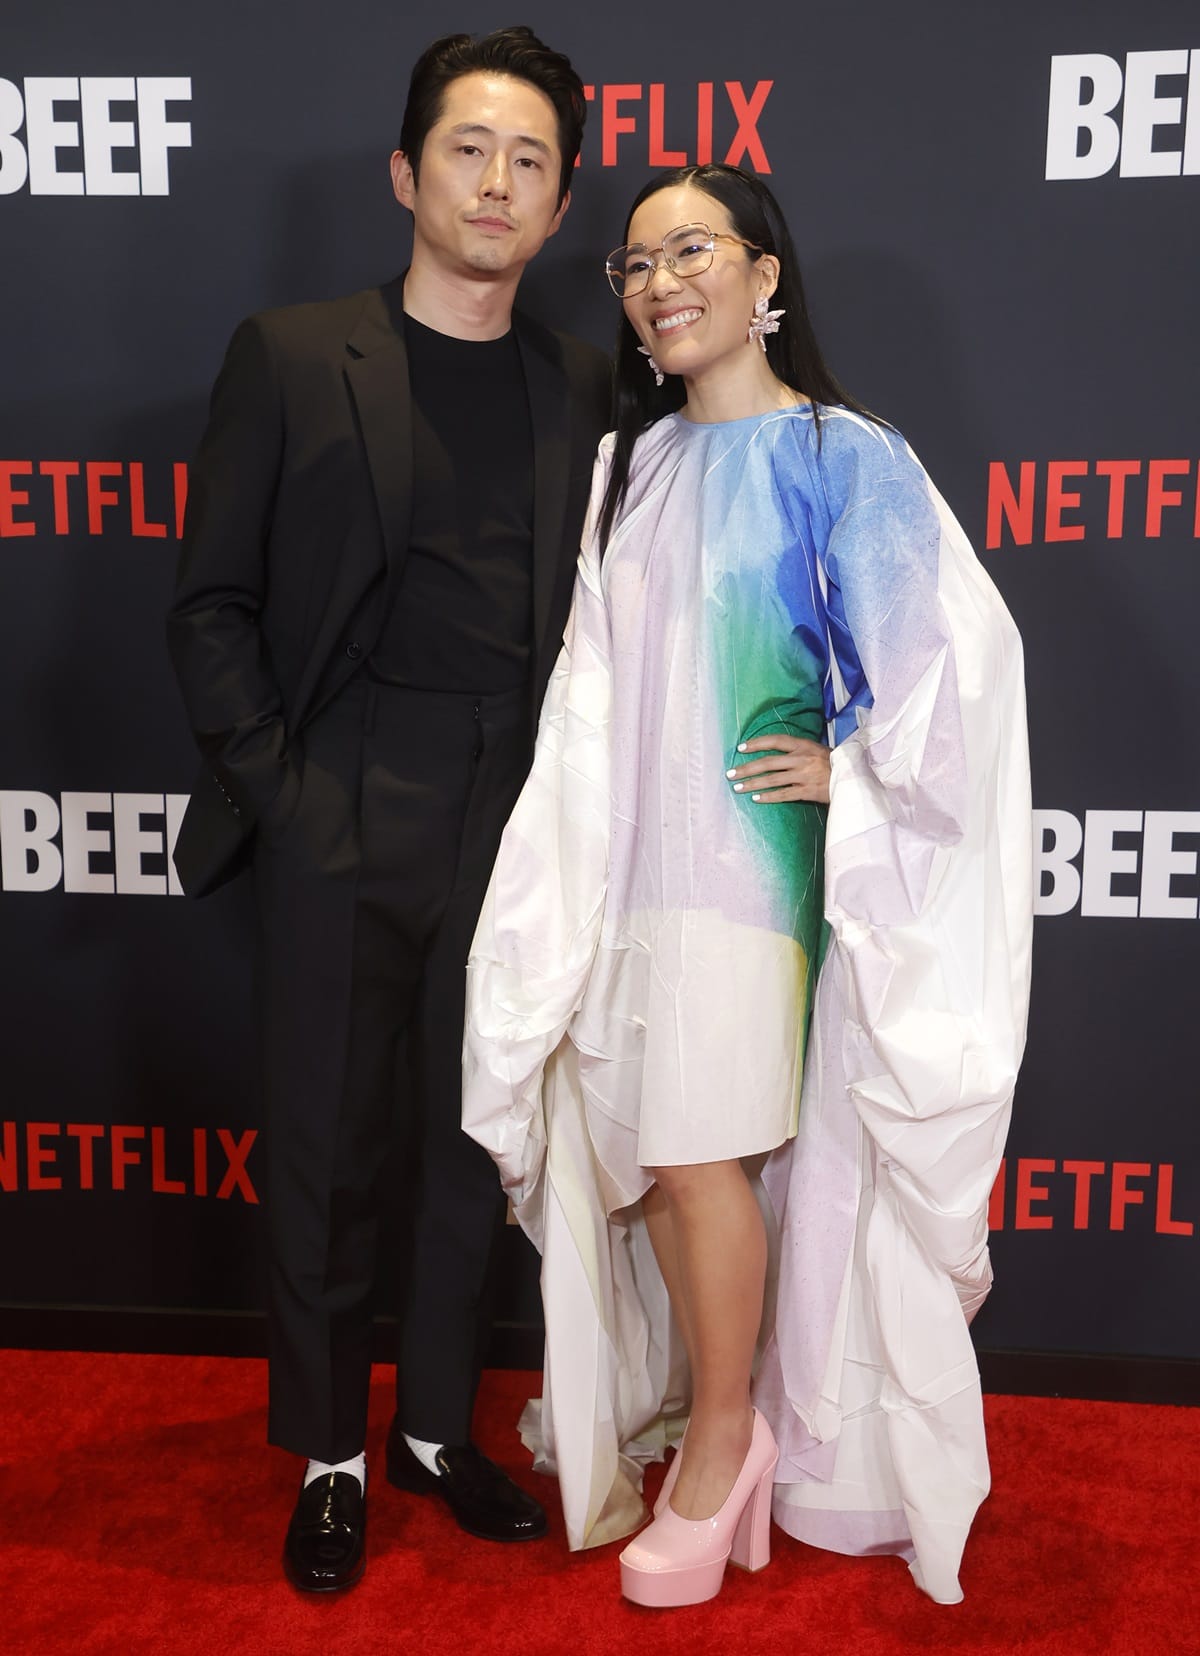 Steven Yeun, who portrays Danny Cho, towers over his shorter co-star Ali Wong, who plays Amy Lau